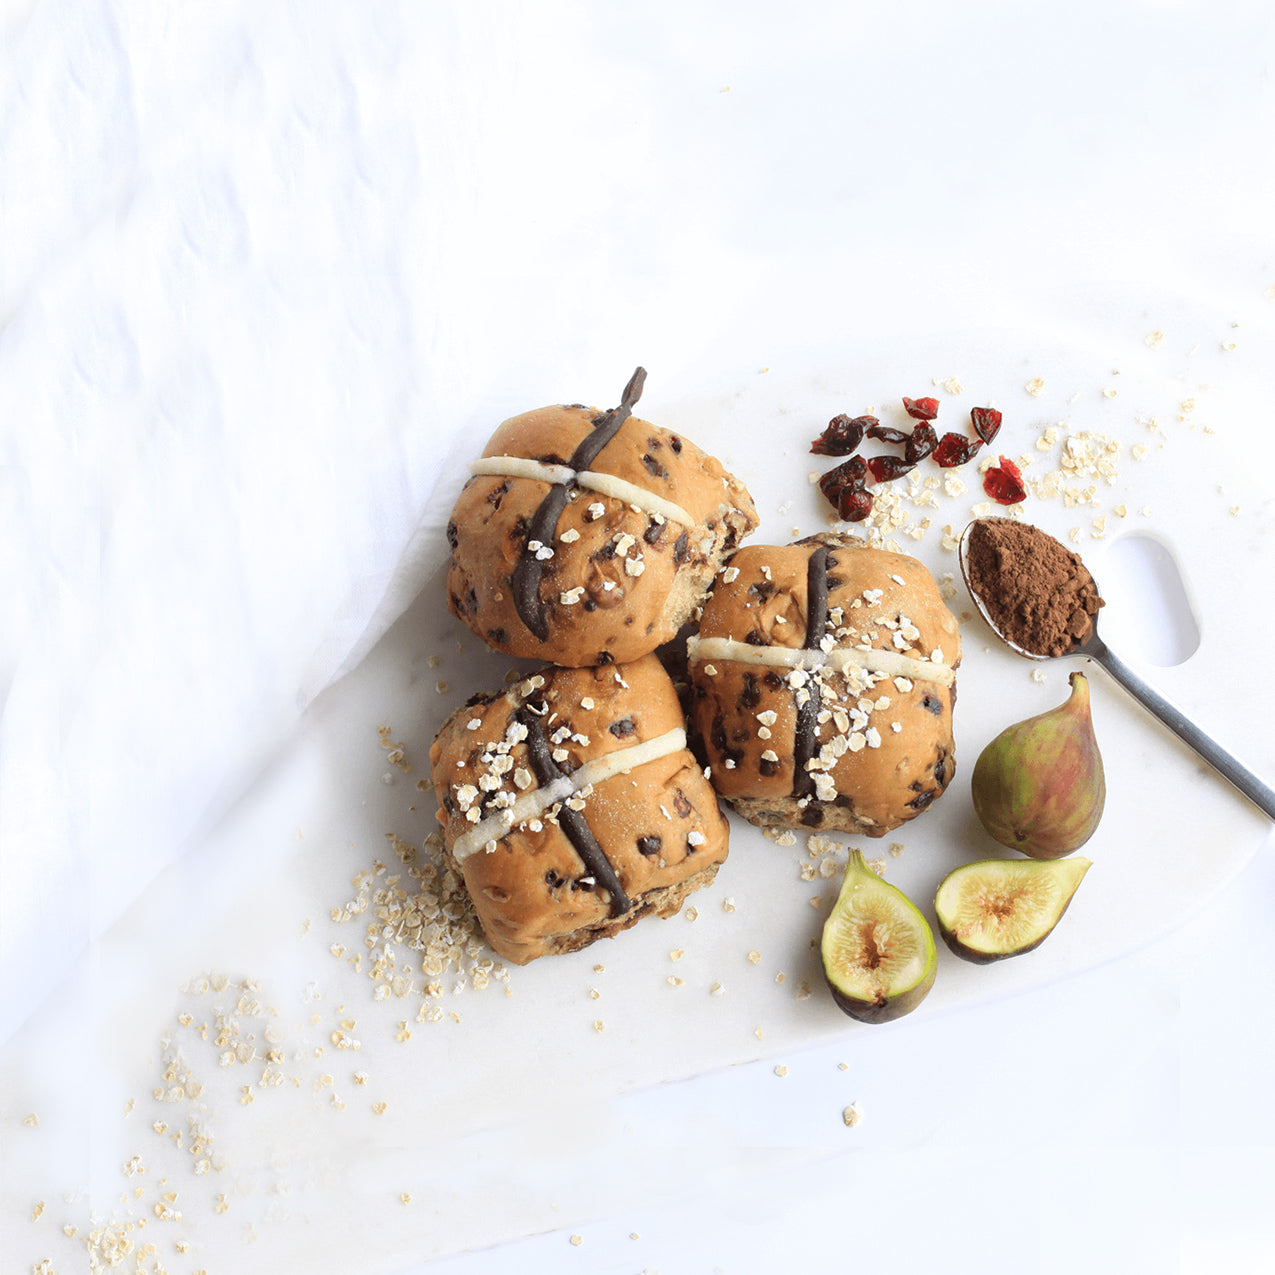 Recipe: Healthy Hot Cross Buns With Rolled Oats